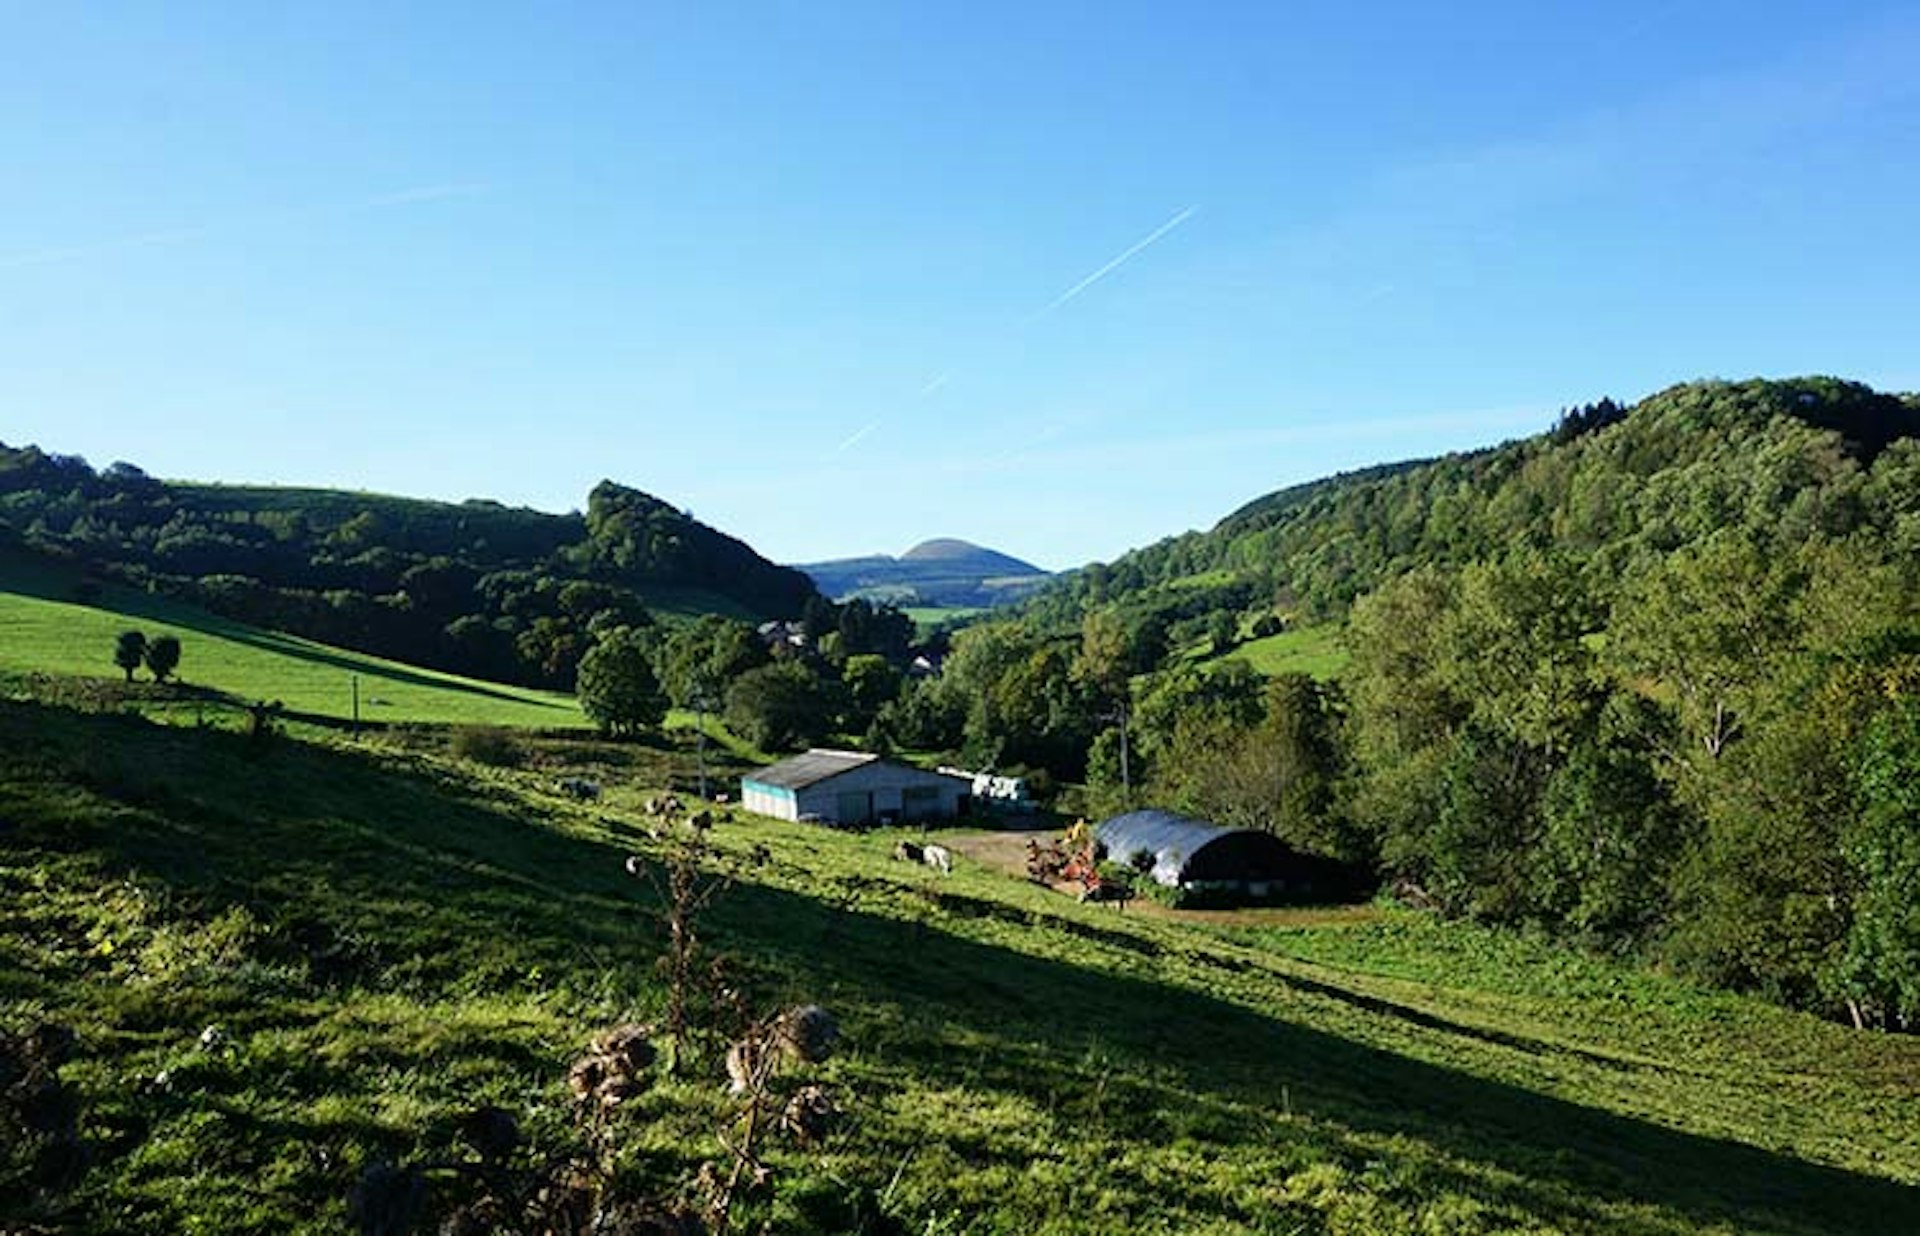 Orcival village in the Auvergne is tucked in among farmhouses and fields. Image by Anita Isalska / Lonely Planet